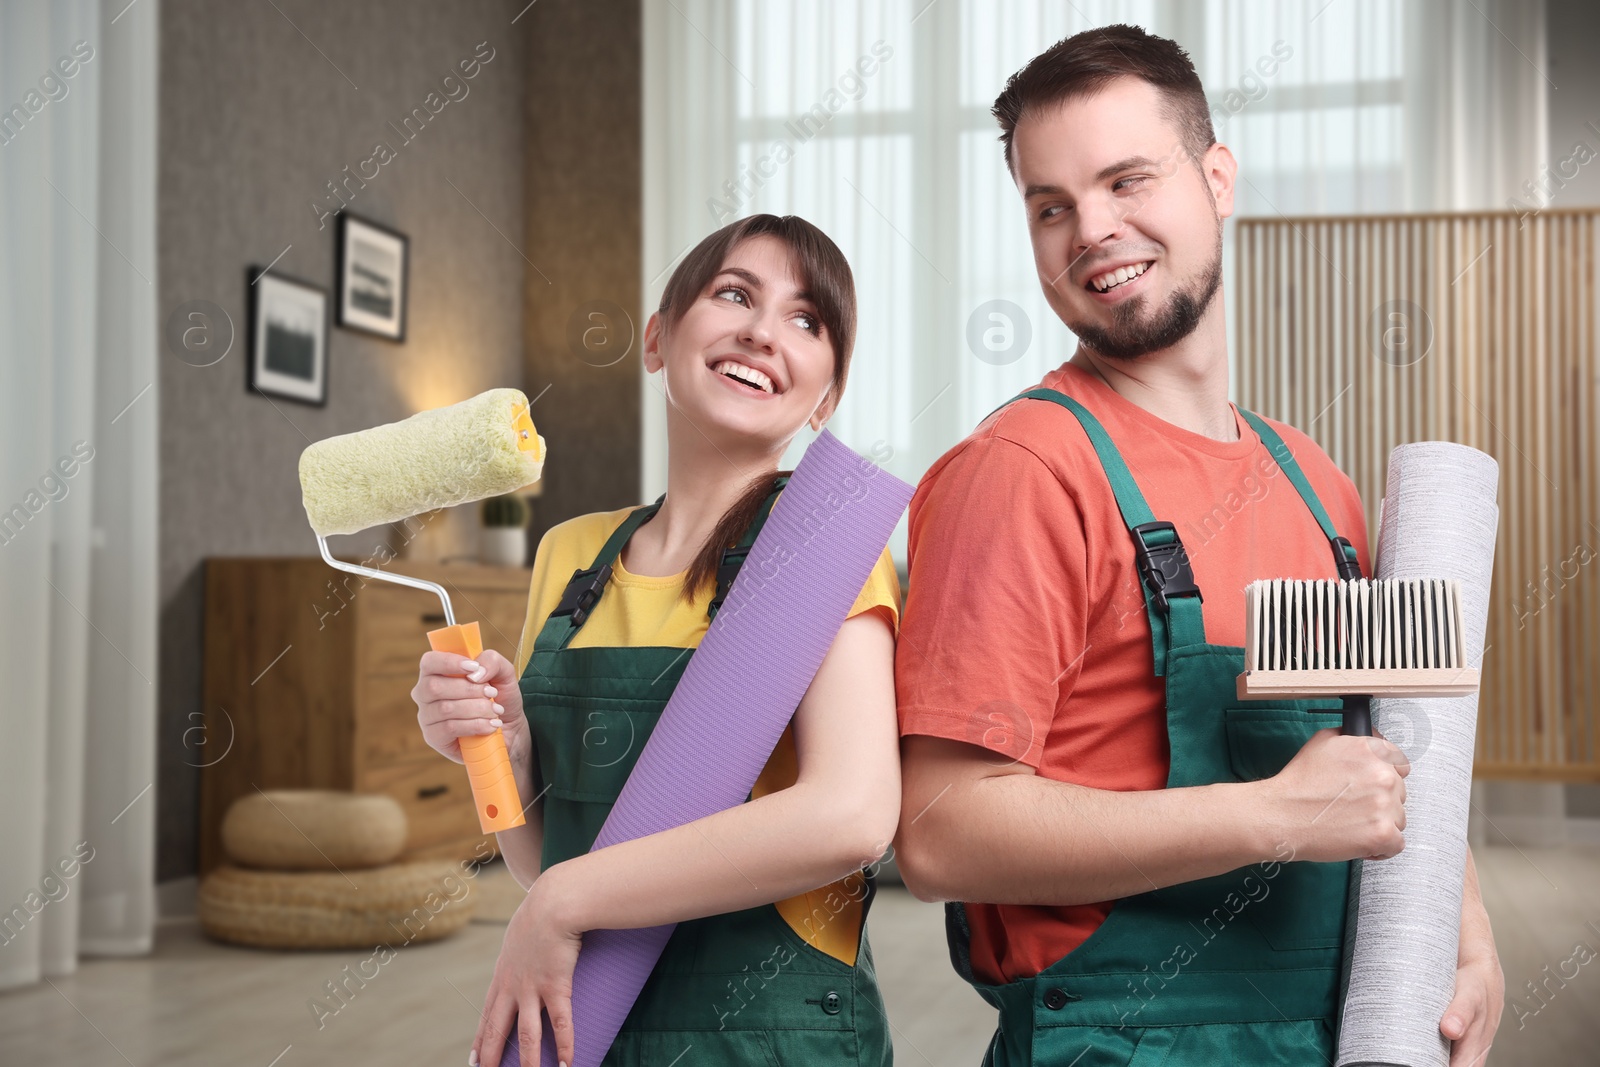 Image of Workers with wallpaper rolls and tools in room